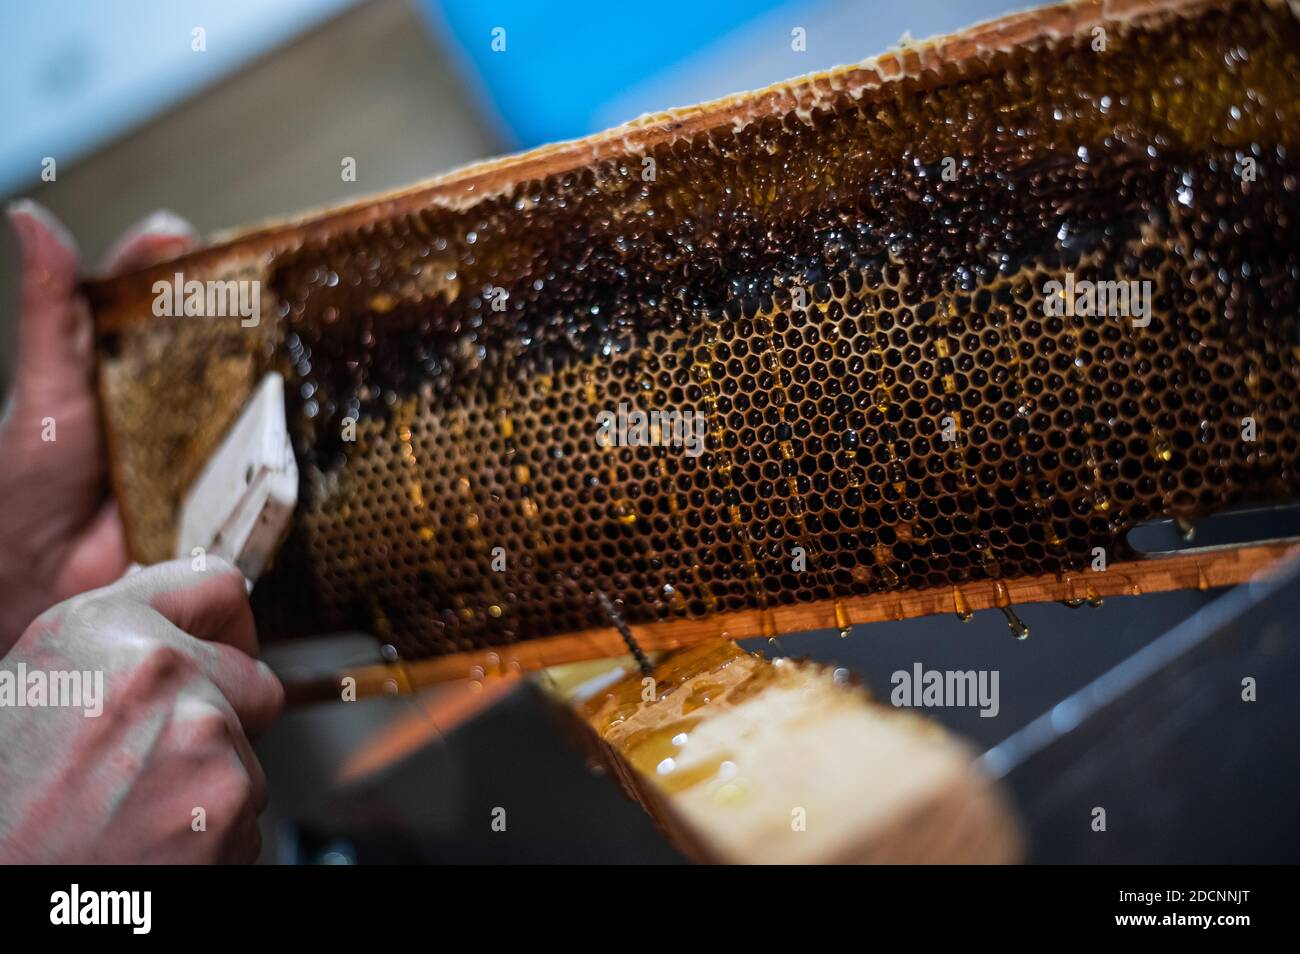 Uncovering the honeycombs with the scraper by hand, honey harvest. Stock Photo